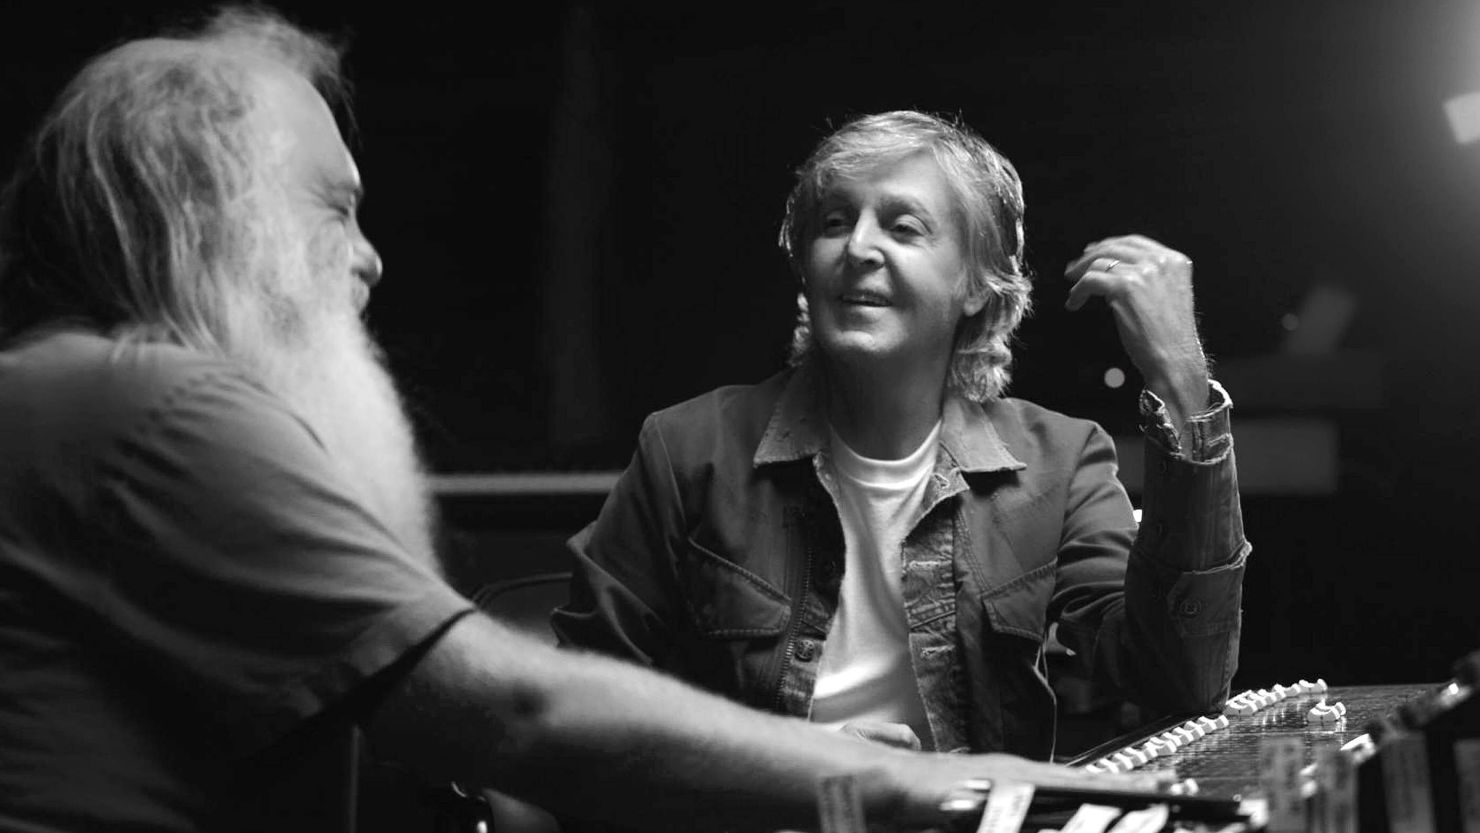 Producer Rick Rubin chats with Paul McCartney in the docuseries 'McCartney 3,2,1' (Courtesy of Hulu)